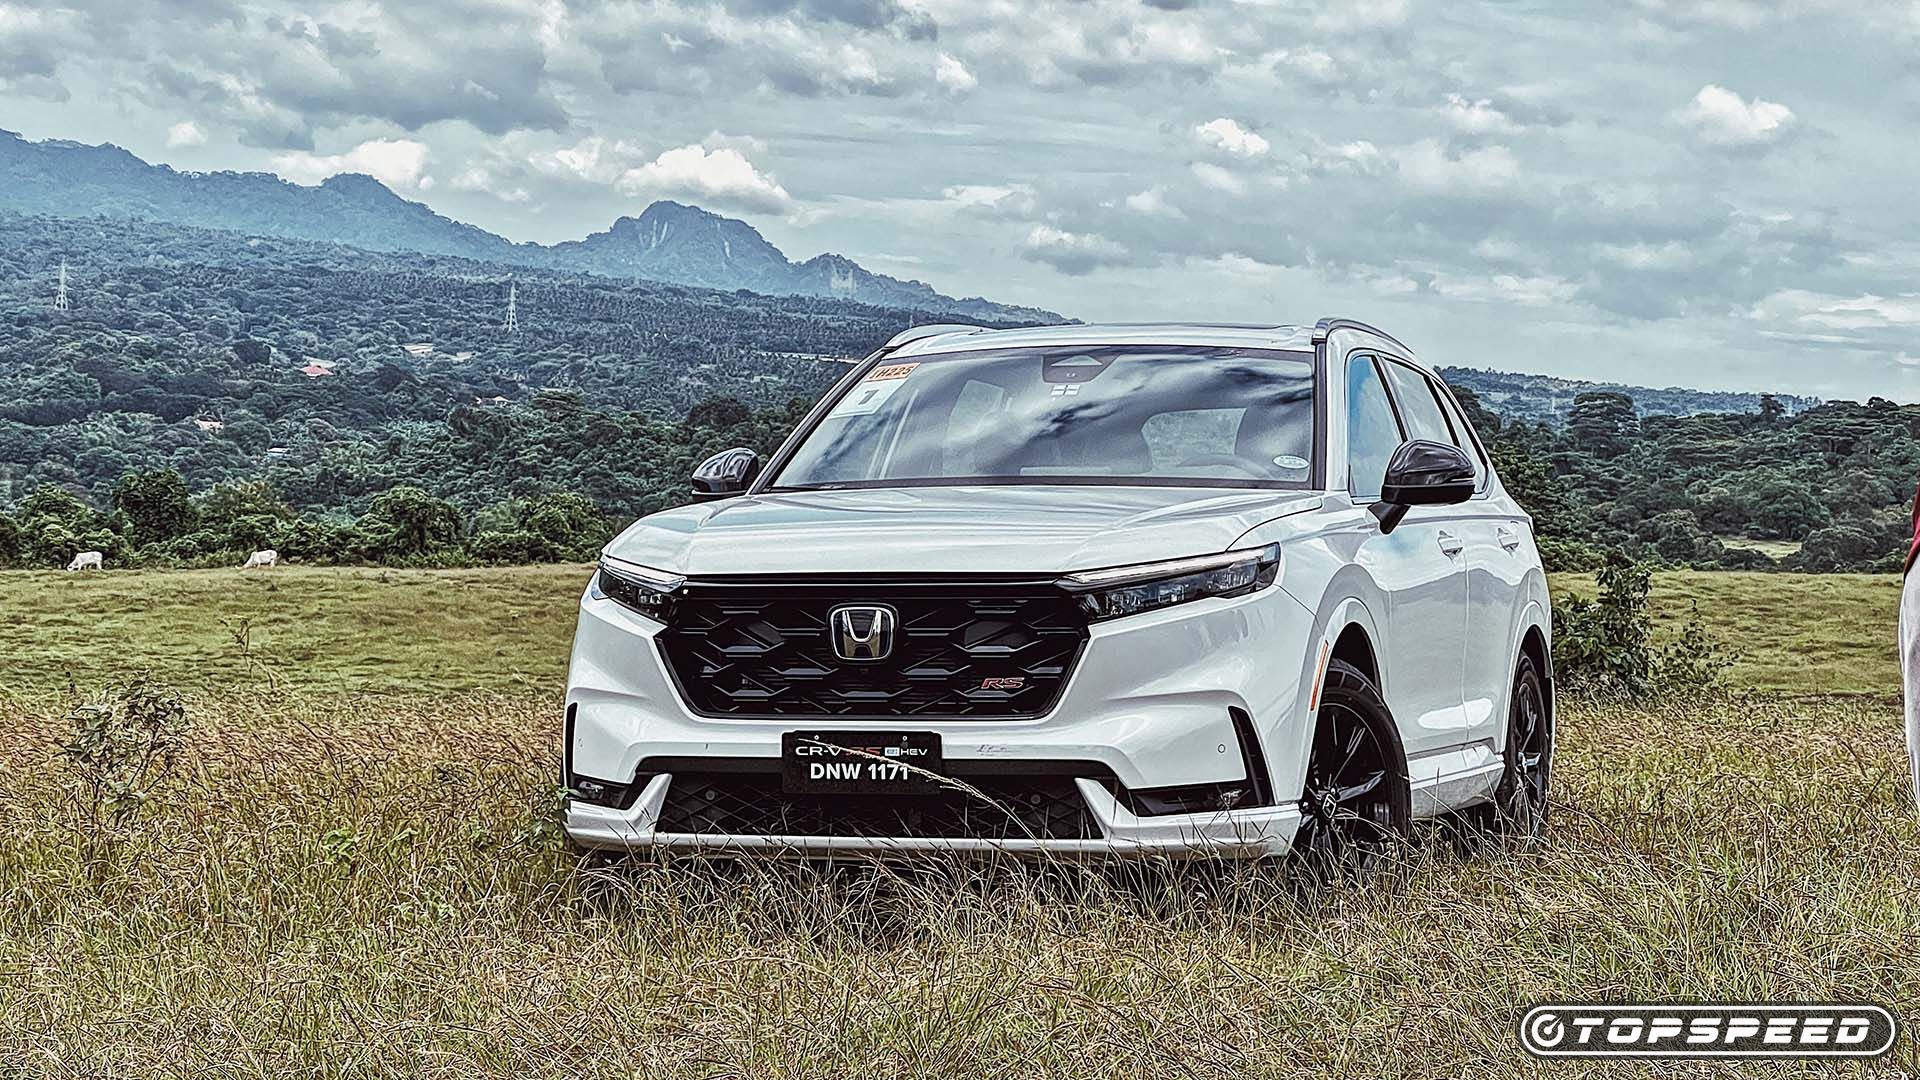 2023 Honda ZR-V price and specs: $40,200 drive-away for new SUV